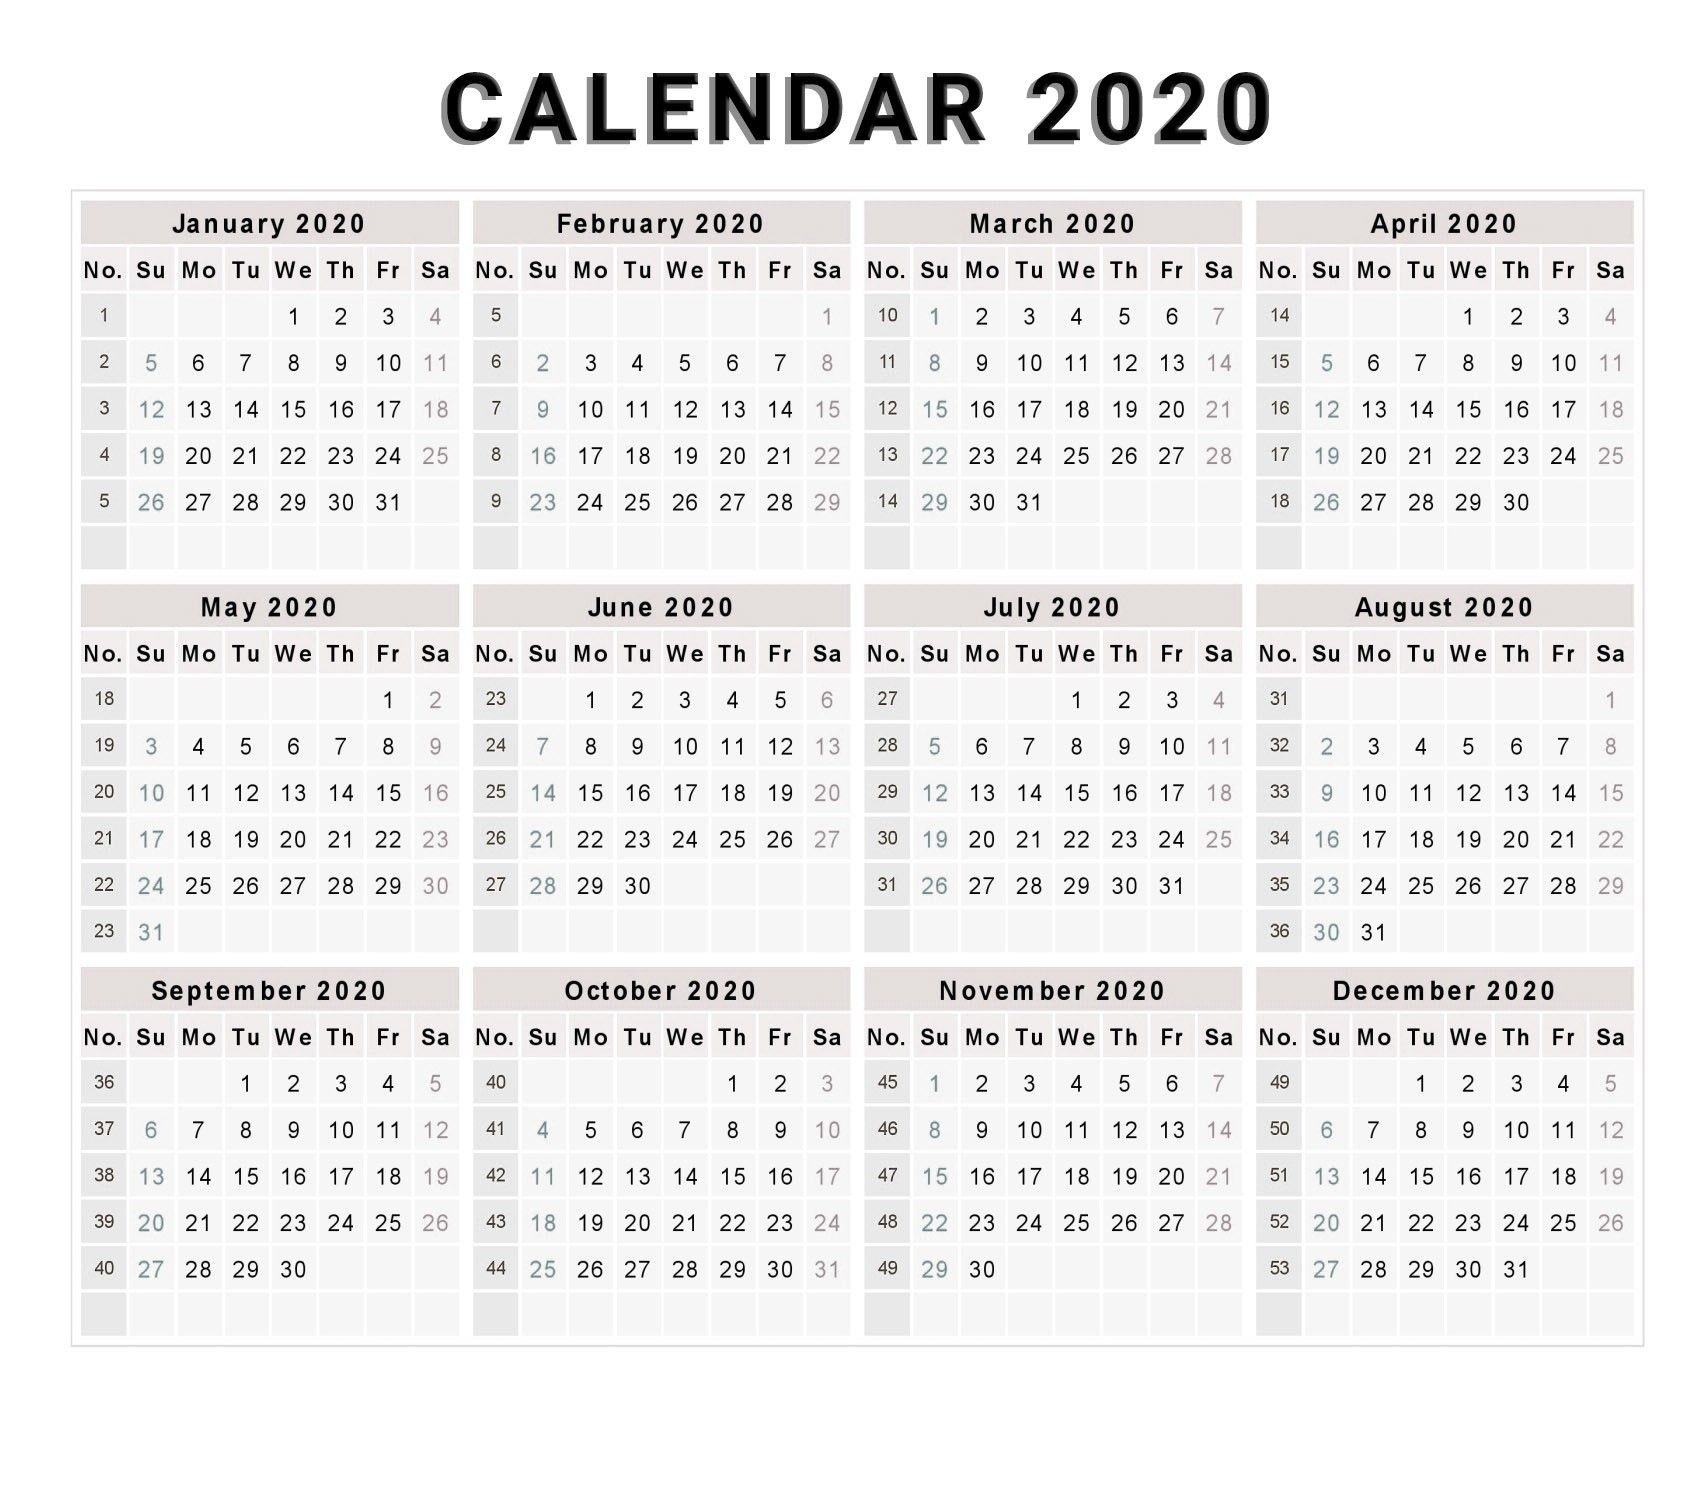 Calendar 2020 Free Printable Calendar 2020 Free 2020 2020 Calendar Template That Has Days Numbered